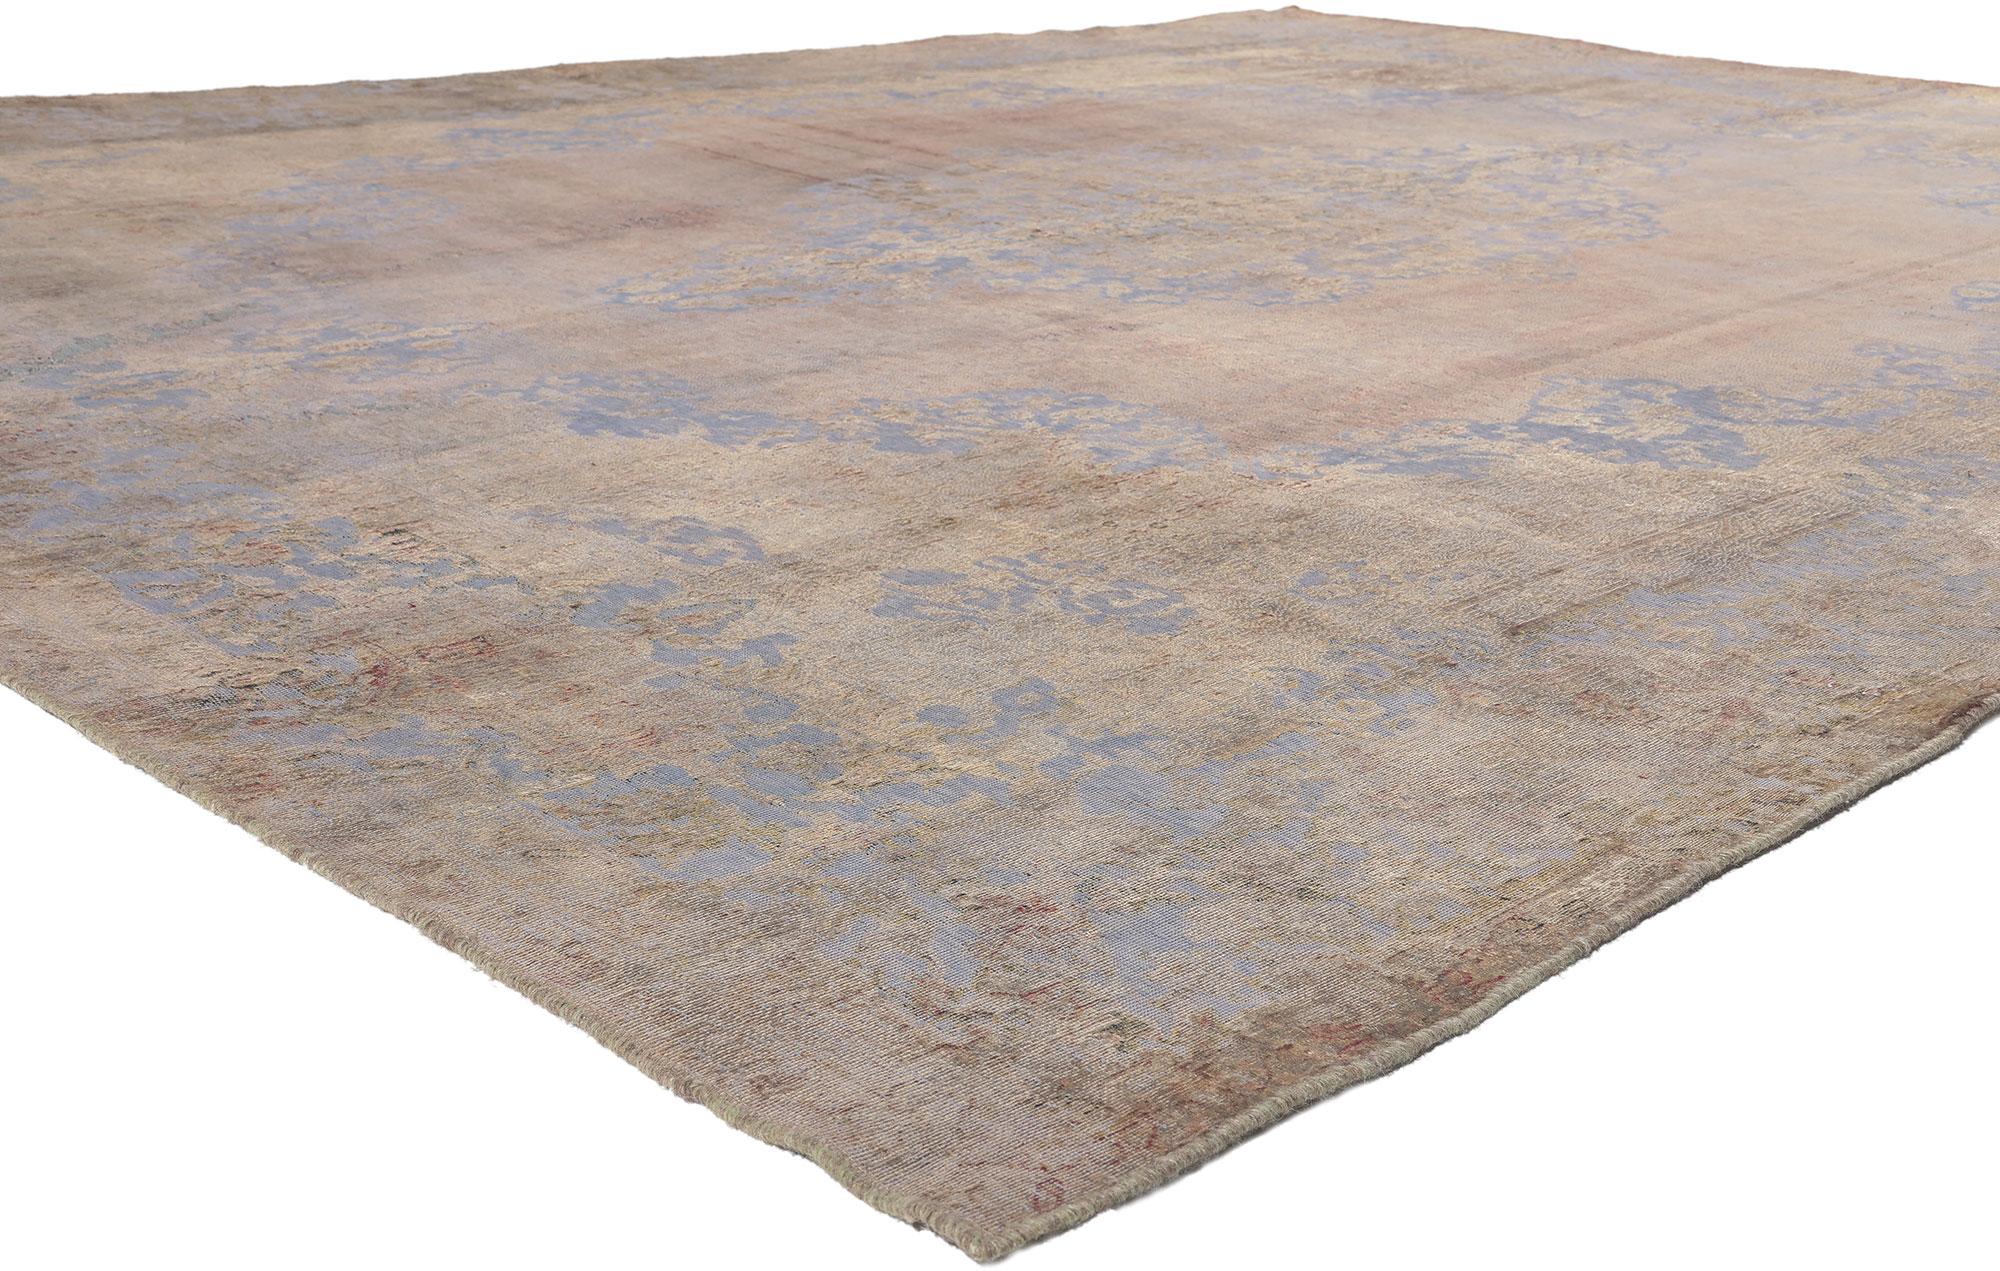 60768 Vintage Turkish Overdyed Rug, 09'06 x 12'11. 
Behold, a rug that effortlessly marries French Provincial charm with Federal Adam Style – a match made in decor heaven. This hand-knotted wool vintage Turkish overdyed rug is more than just a floor